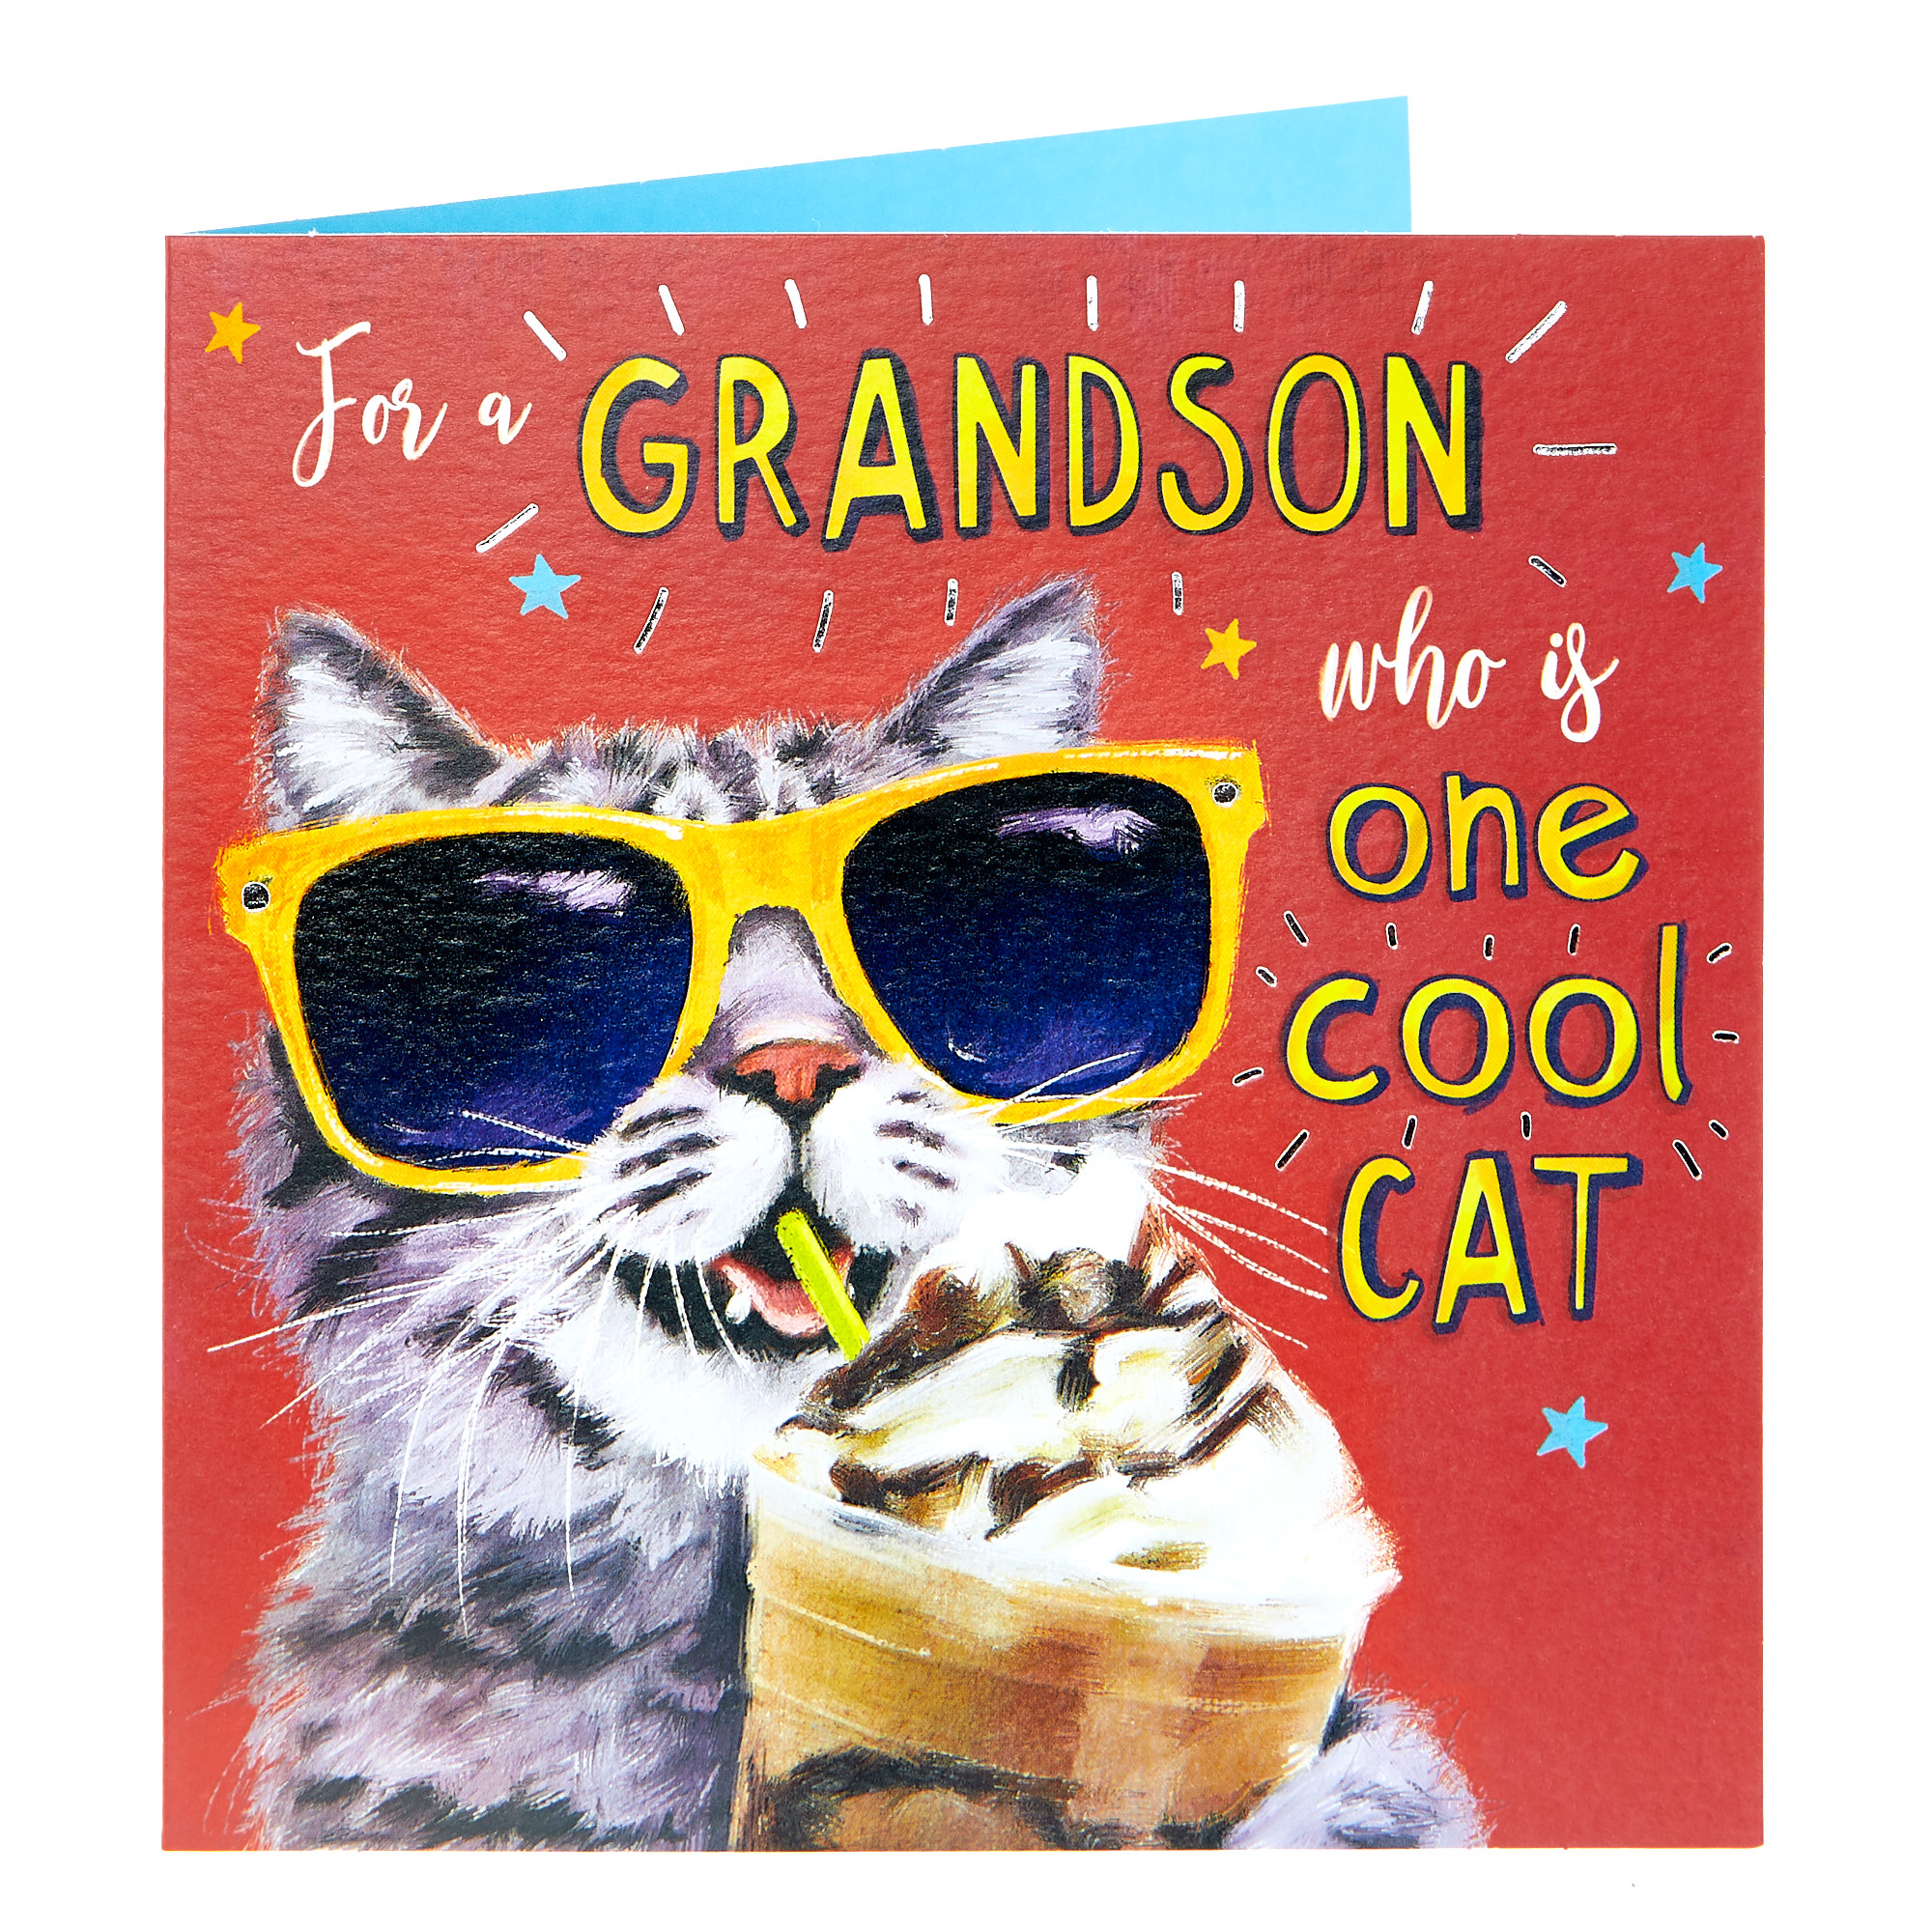 Buy Birthday Card - Grandson Cool Cat for GBP 0.99 | Card Factory UK